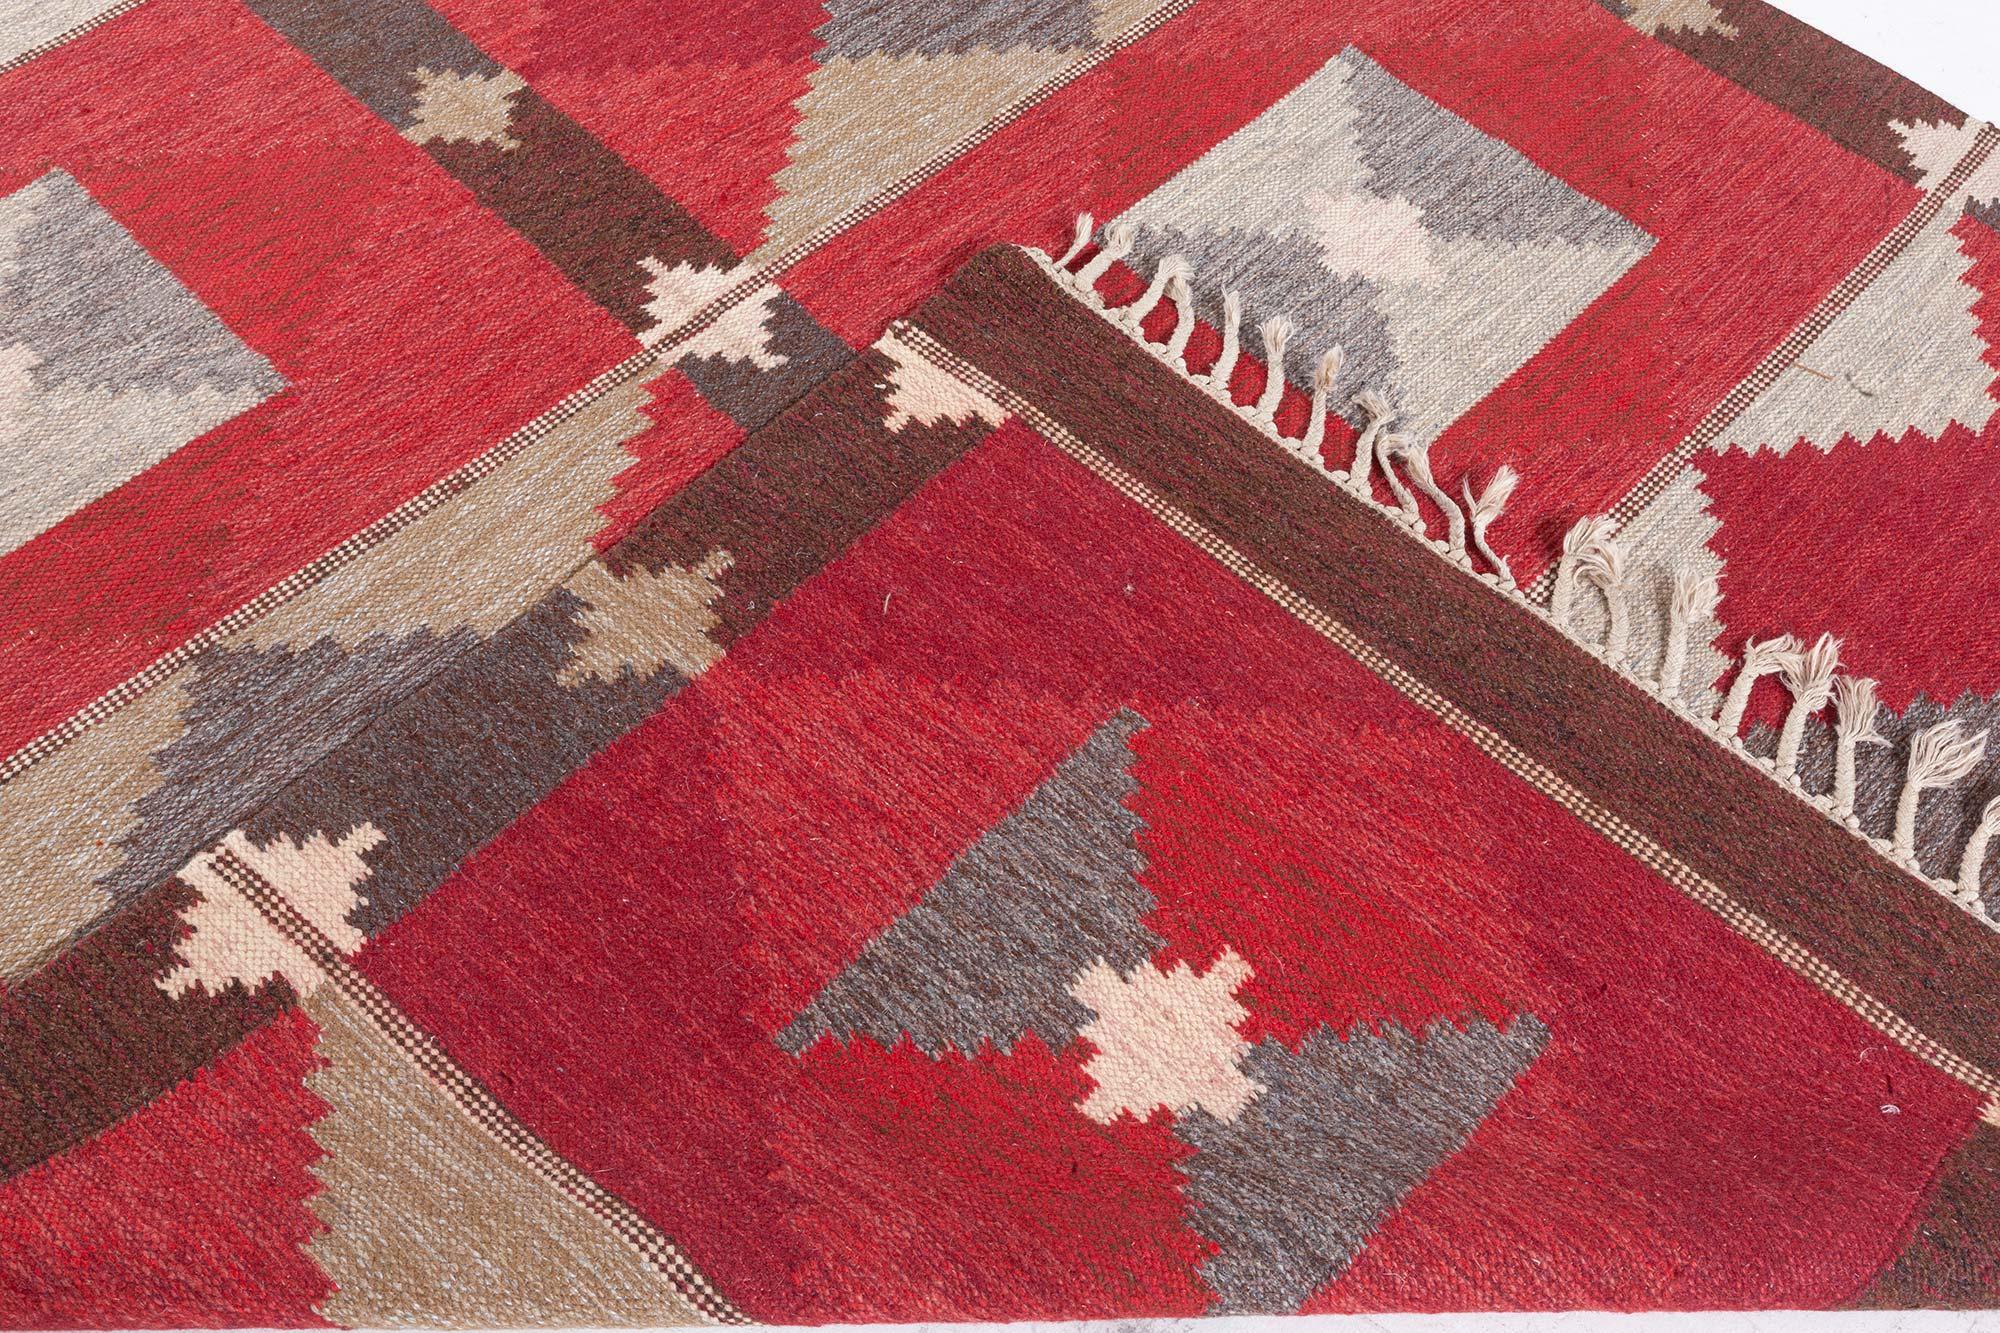 Vintage Swedish Flat Woven Rug by Rakel Carlander In Good Condition For Sale In New York, NY